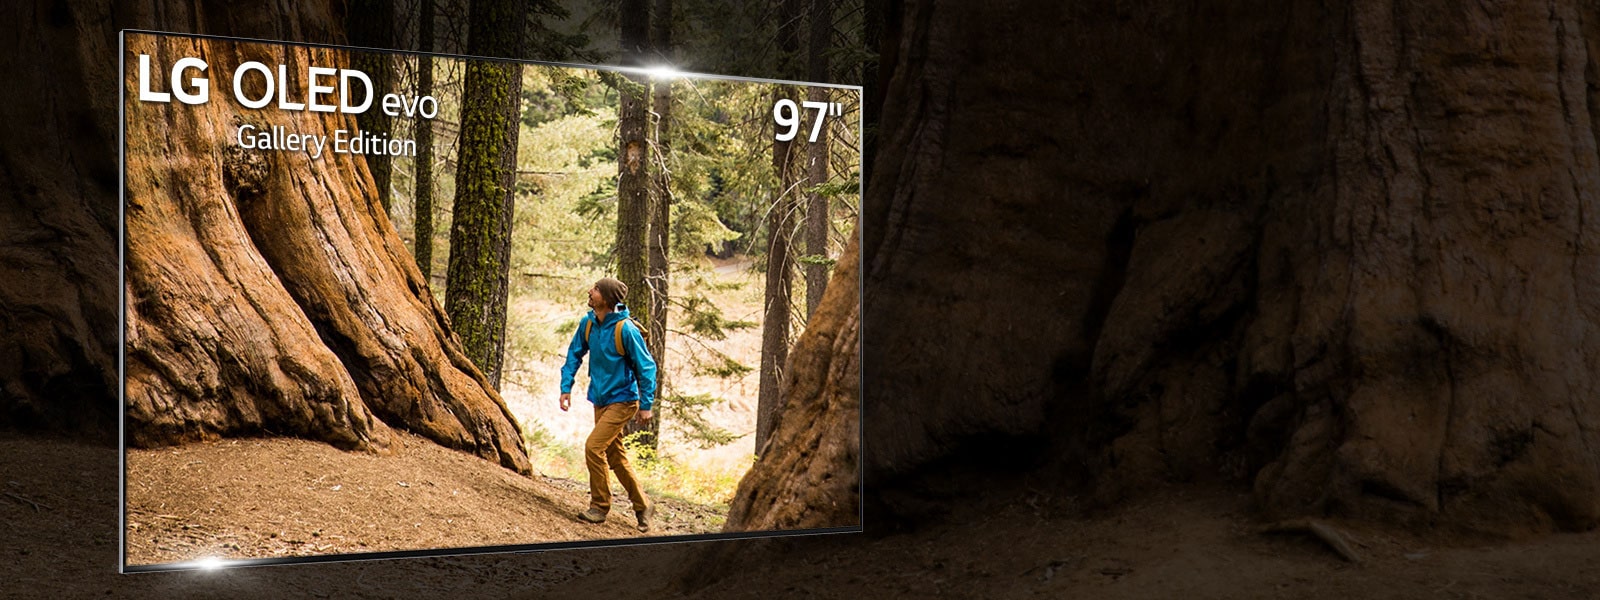 The Best Got Bigger. The World’s Largest OLED TV.